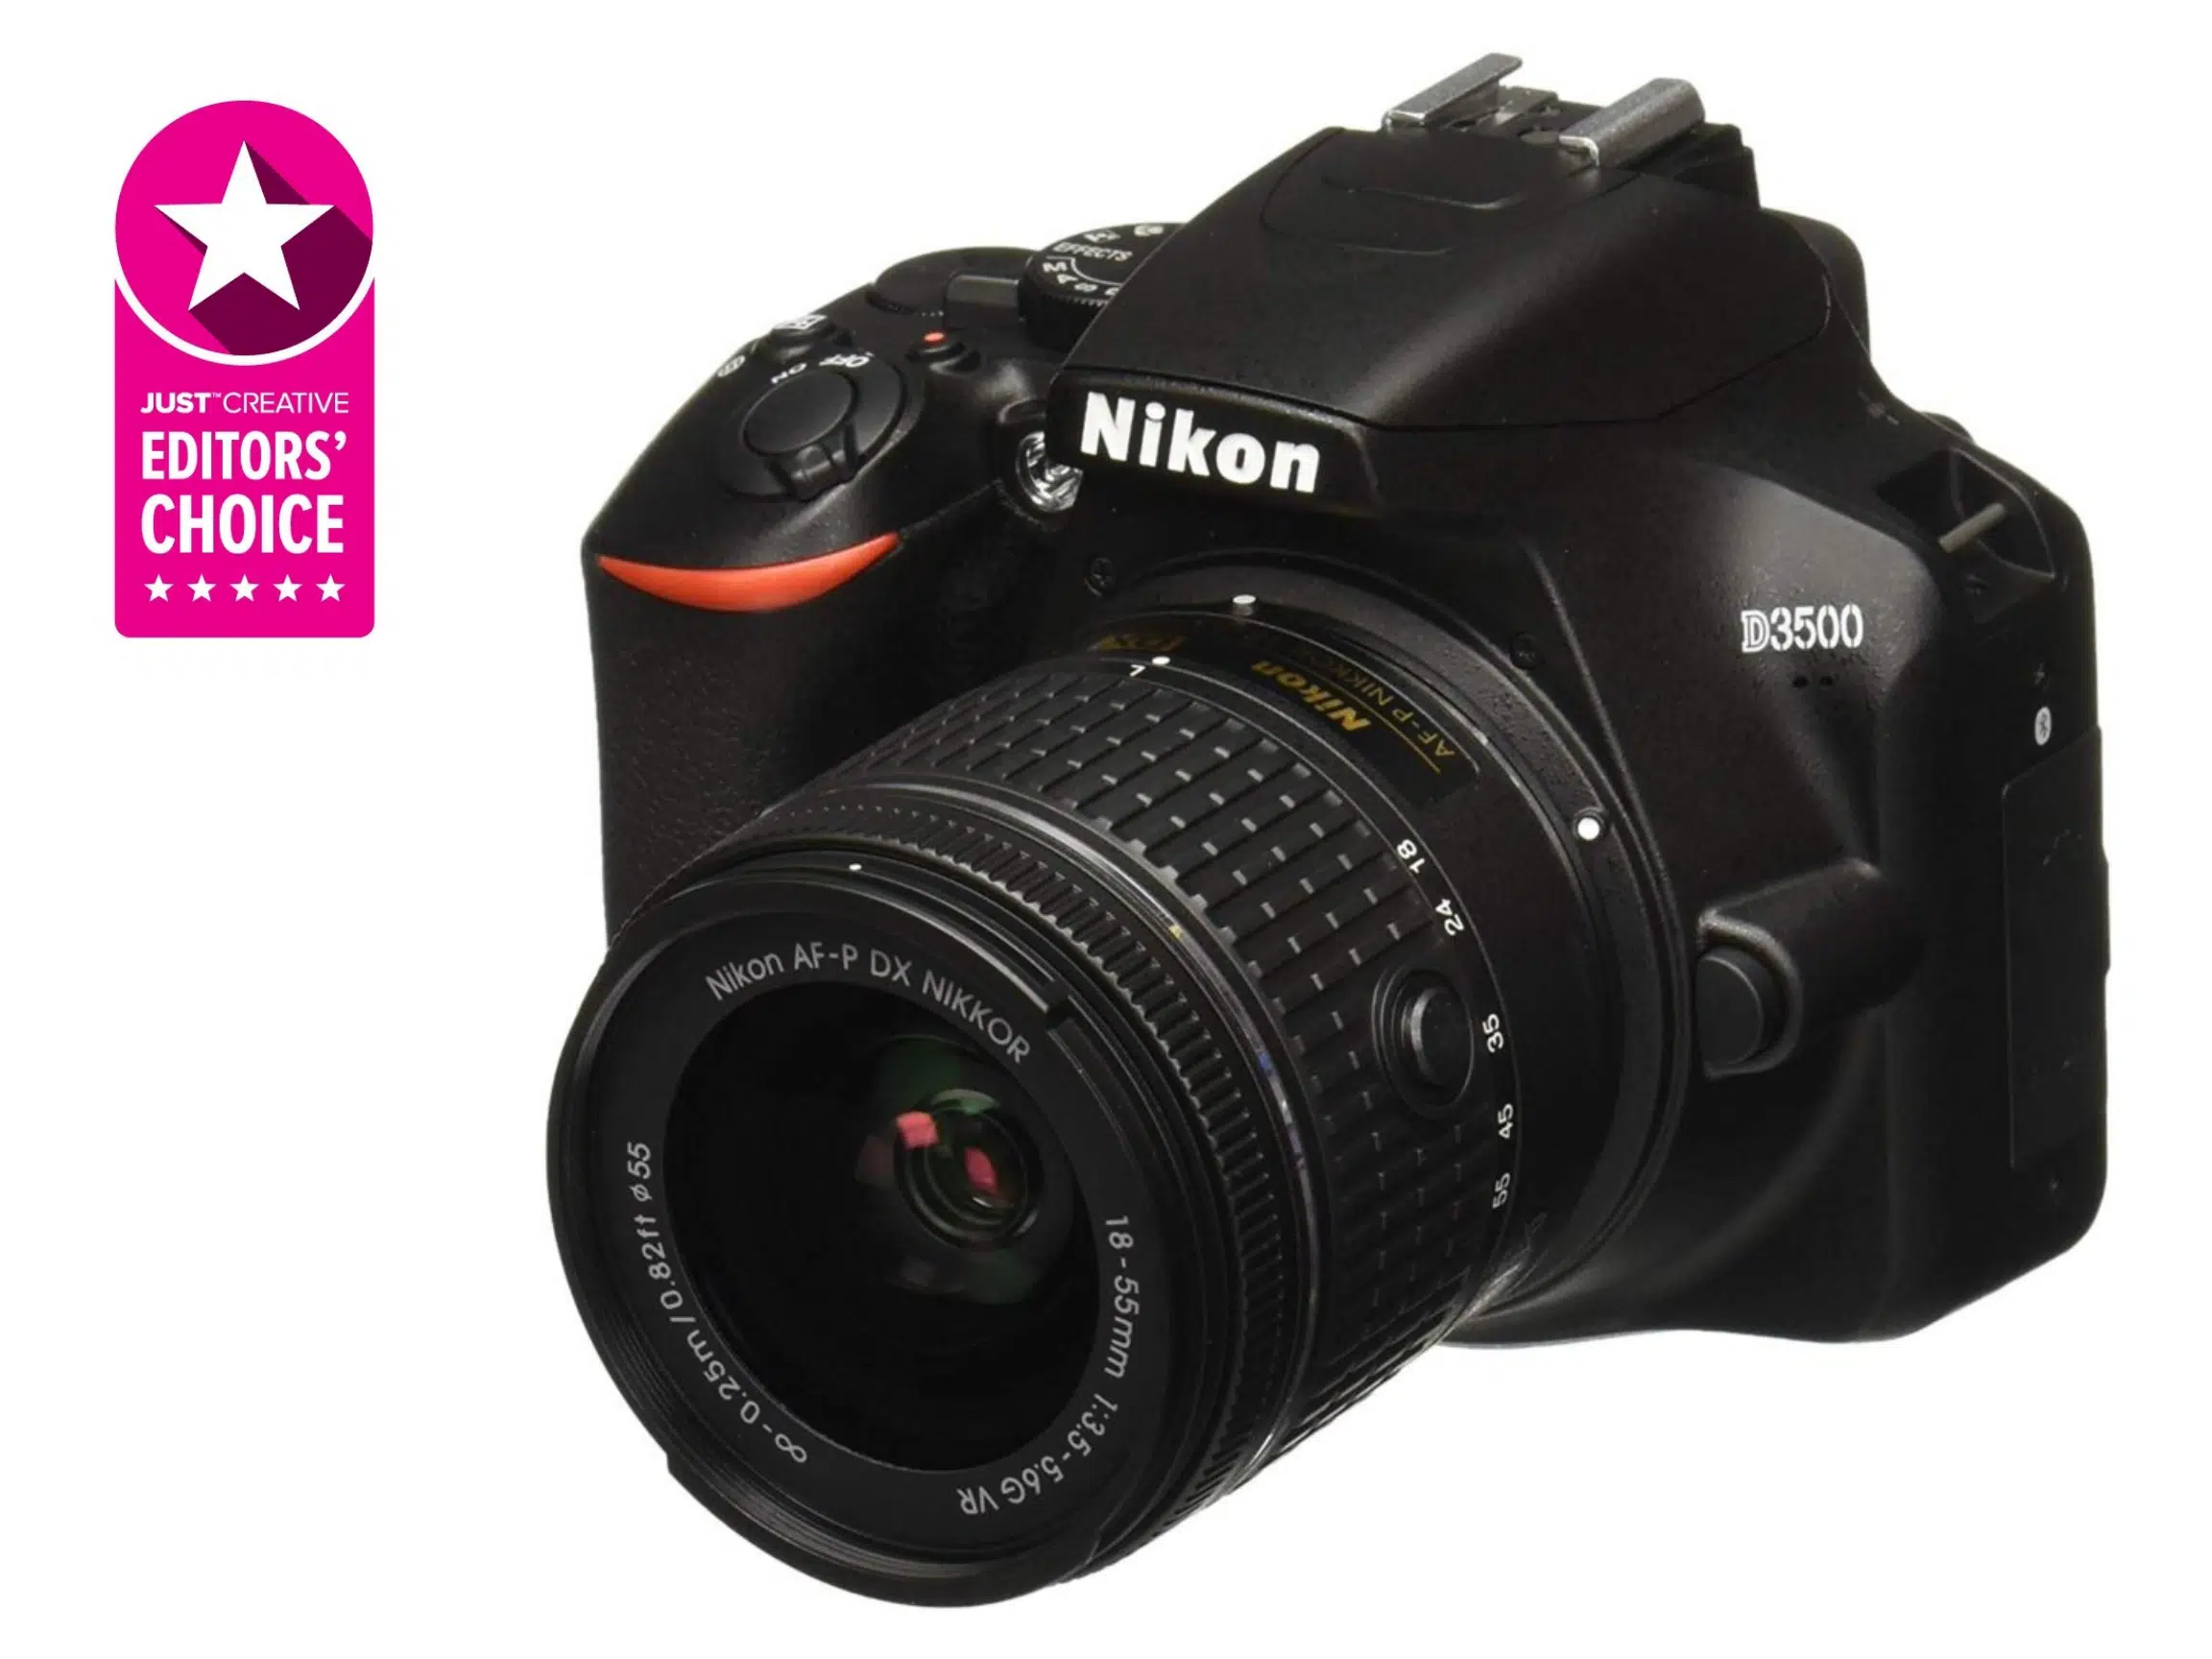 Nikon D3500 - Best all-round camera for beginners